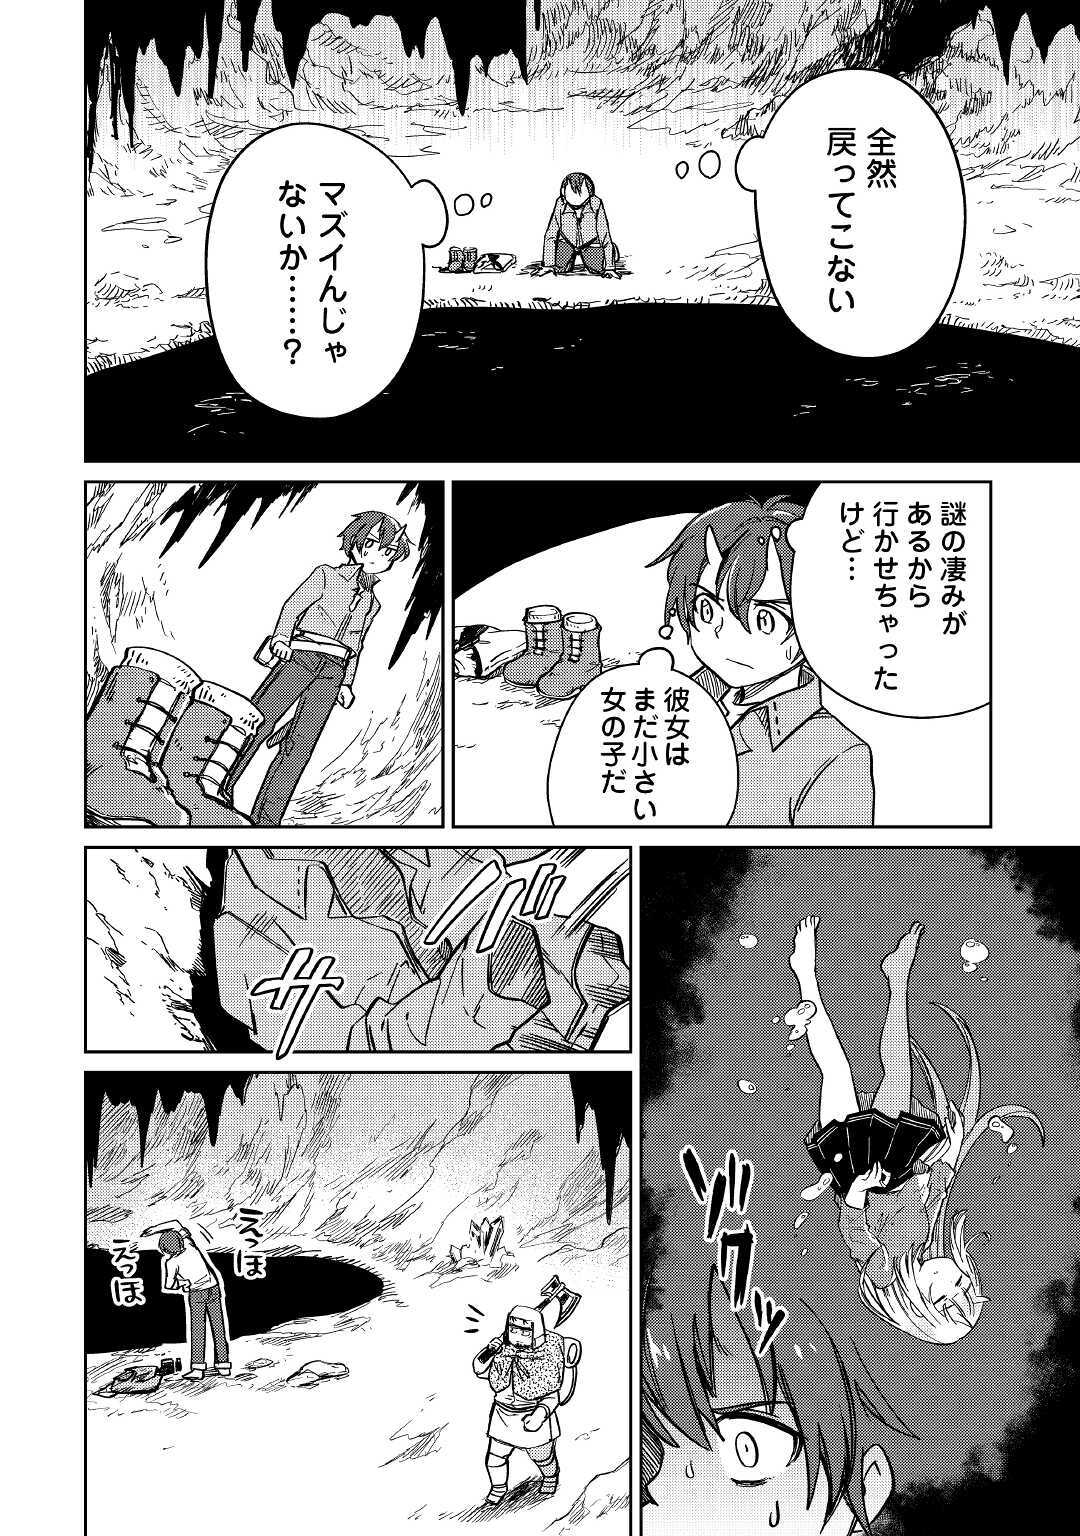 The Former Structural Researcher’s Story of Otherworldly Adventure 第29話 - Page 10